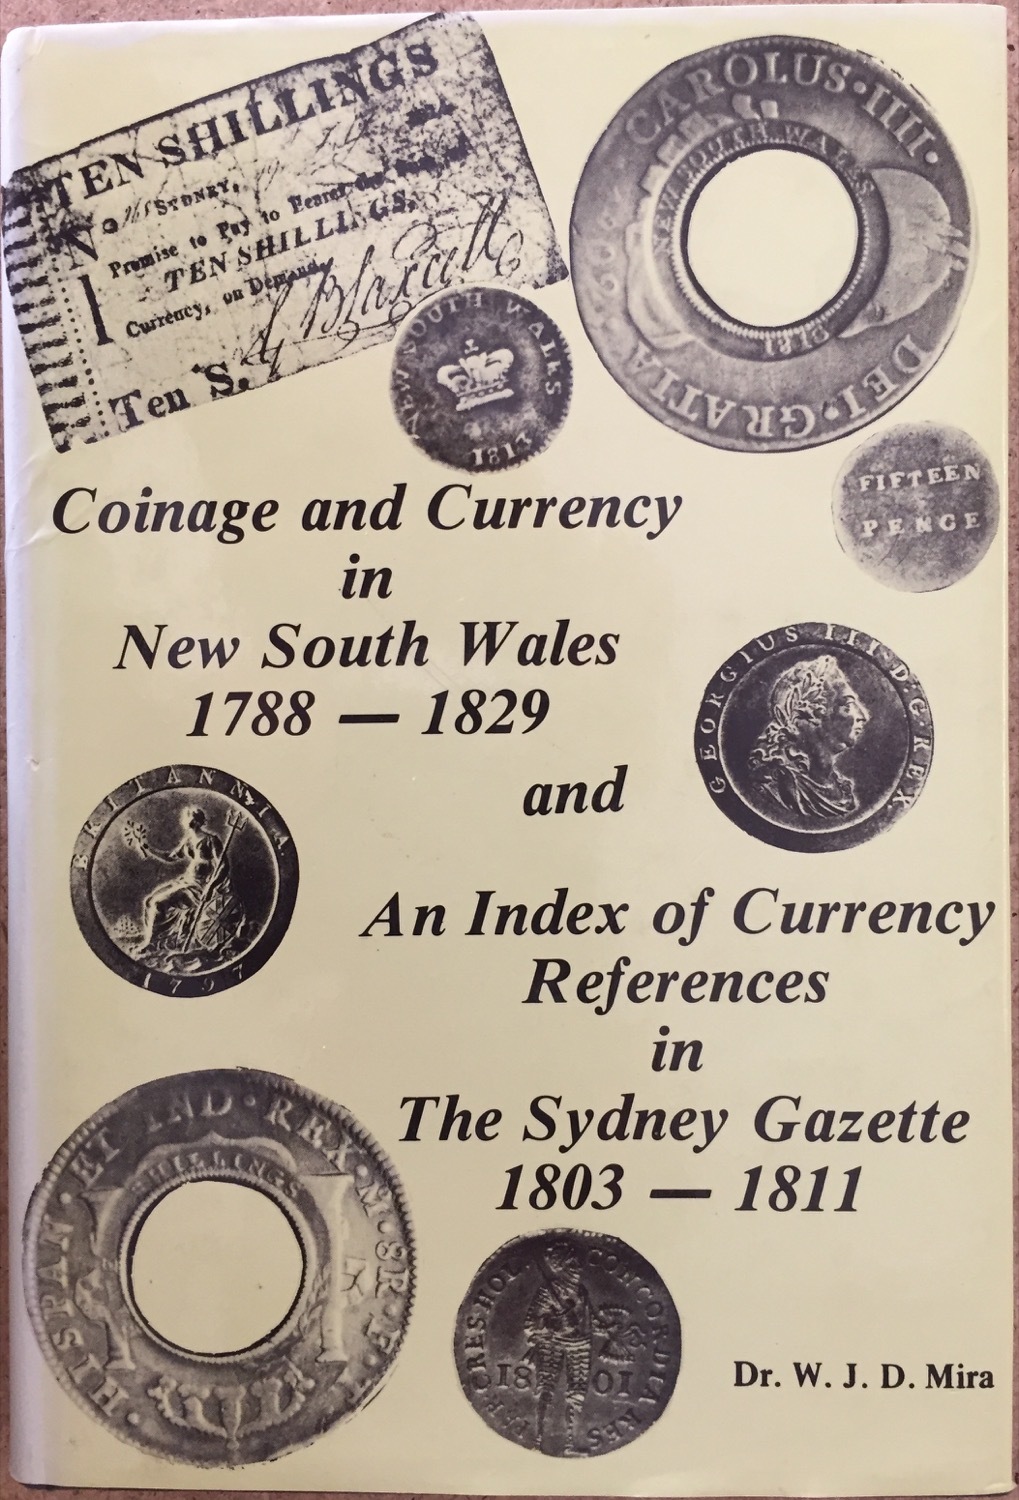 The Coinage & Currency In New South Wales (1788 - 1829) Hardcover Book product image